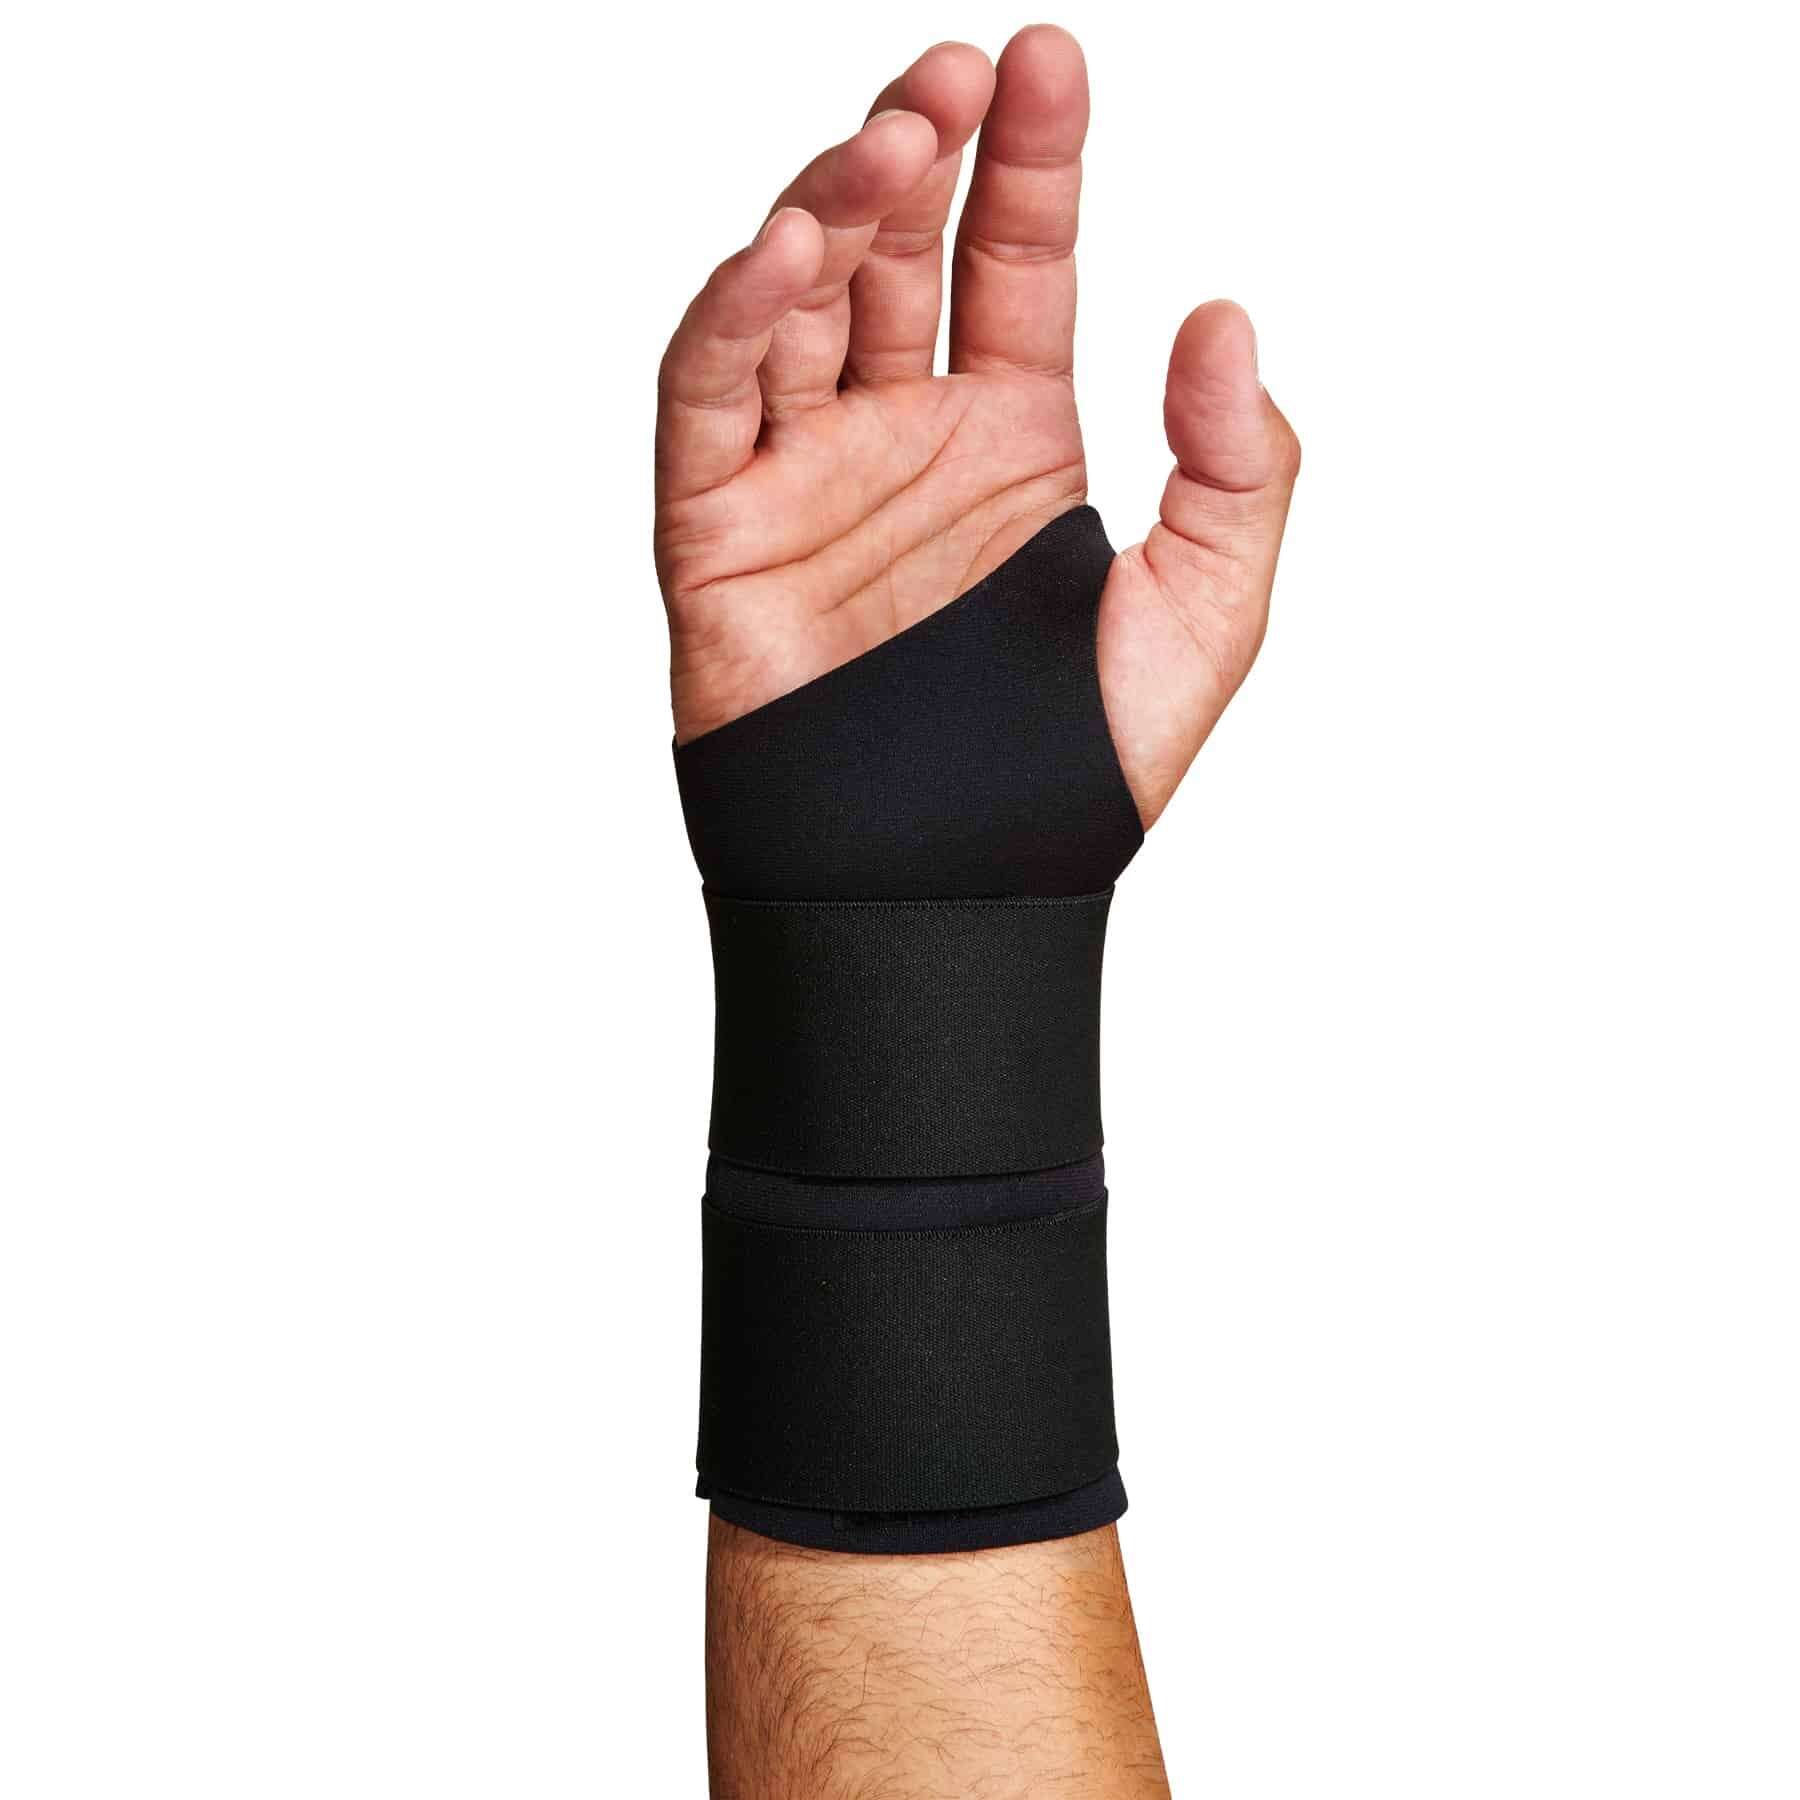 Ambidextrous Double Strap Wrist Support - Wrist Supports